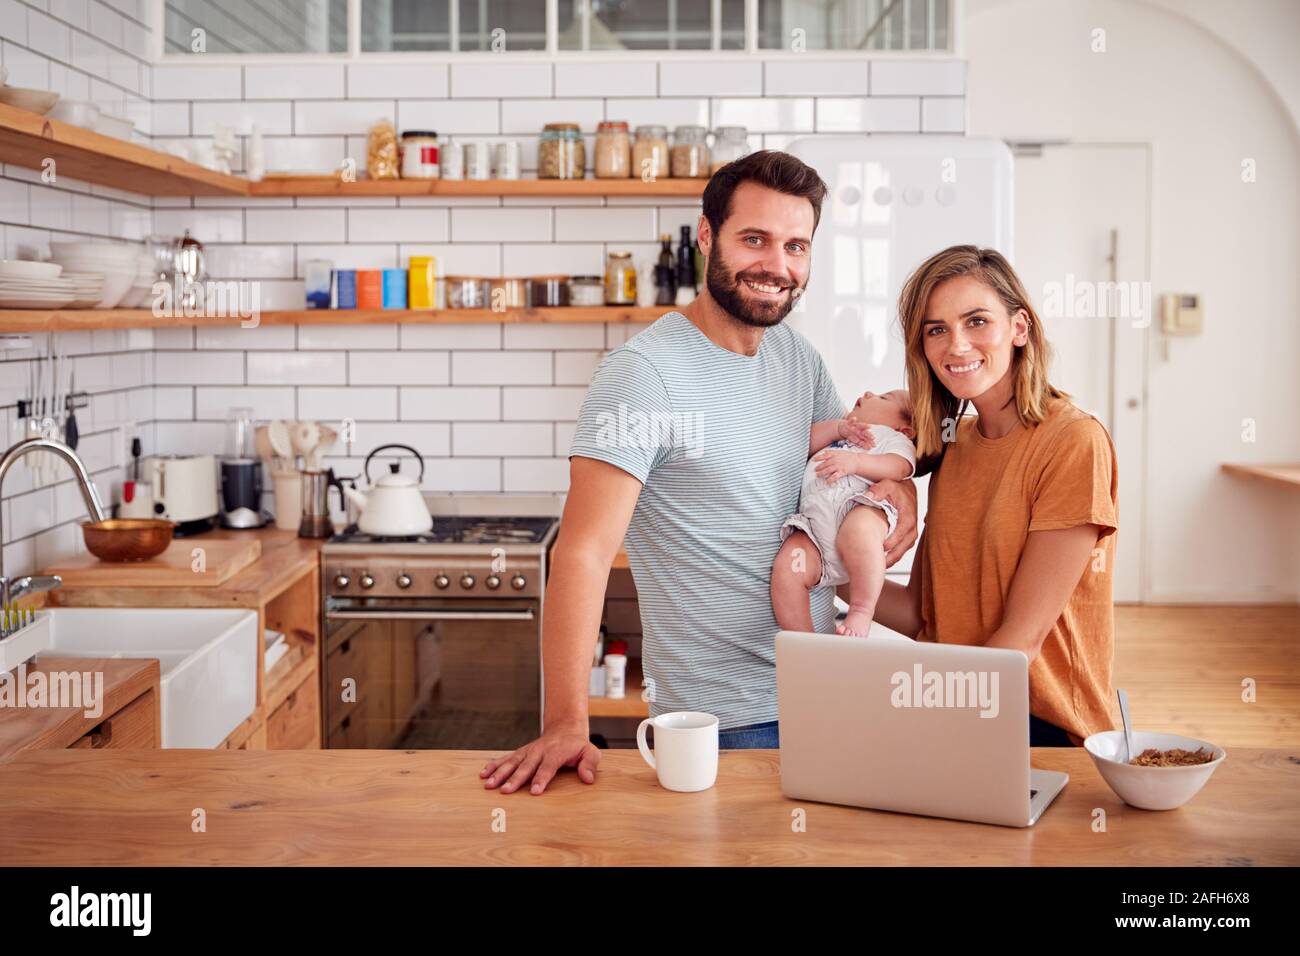 Portrait Of Busy Family In Kitchen At Breakfast With Father Caring For Baby Son Stock Photo